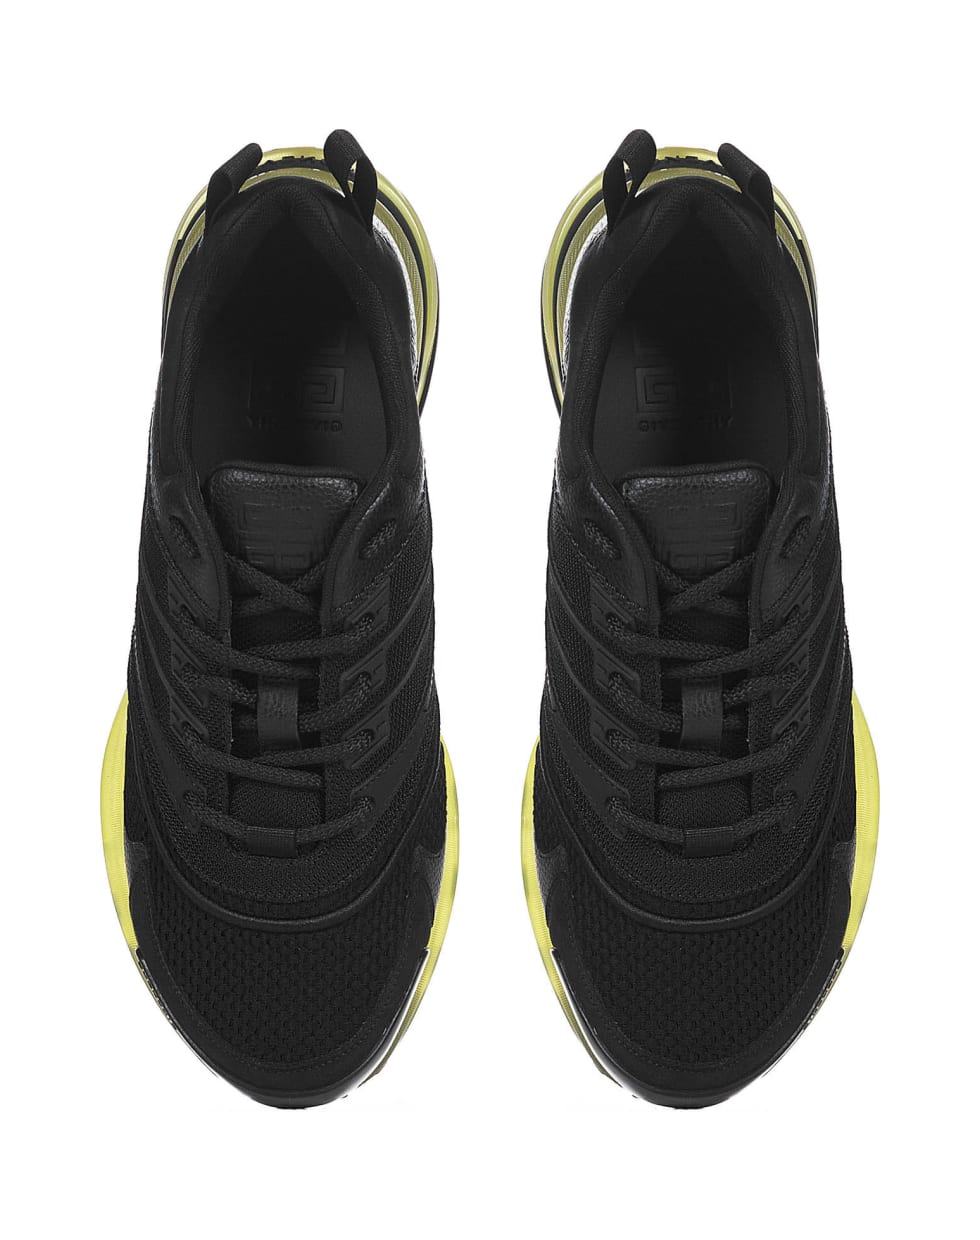 Givenchy Giv 1 Sneakers